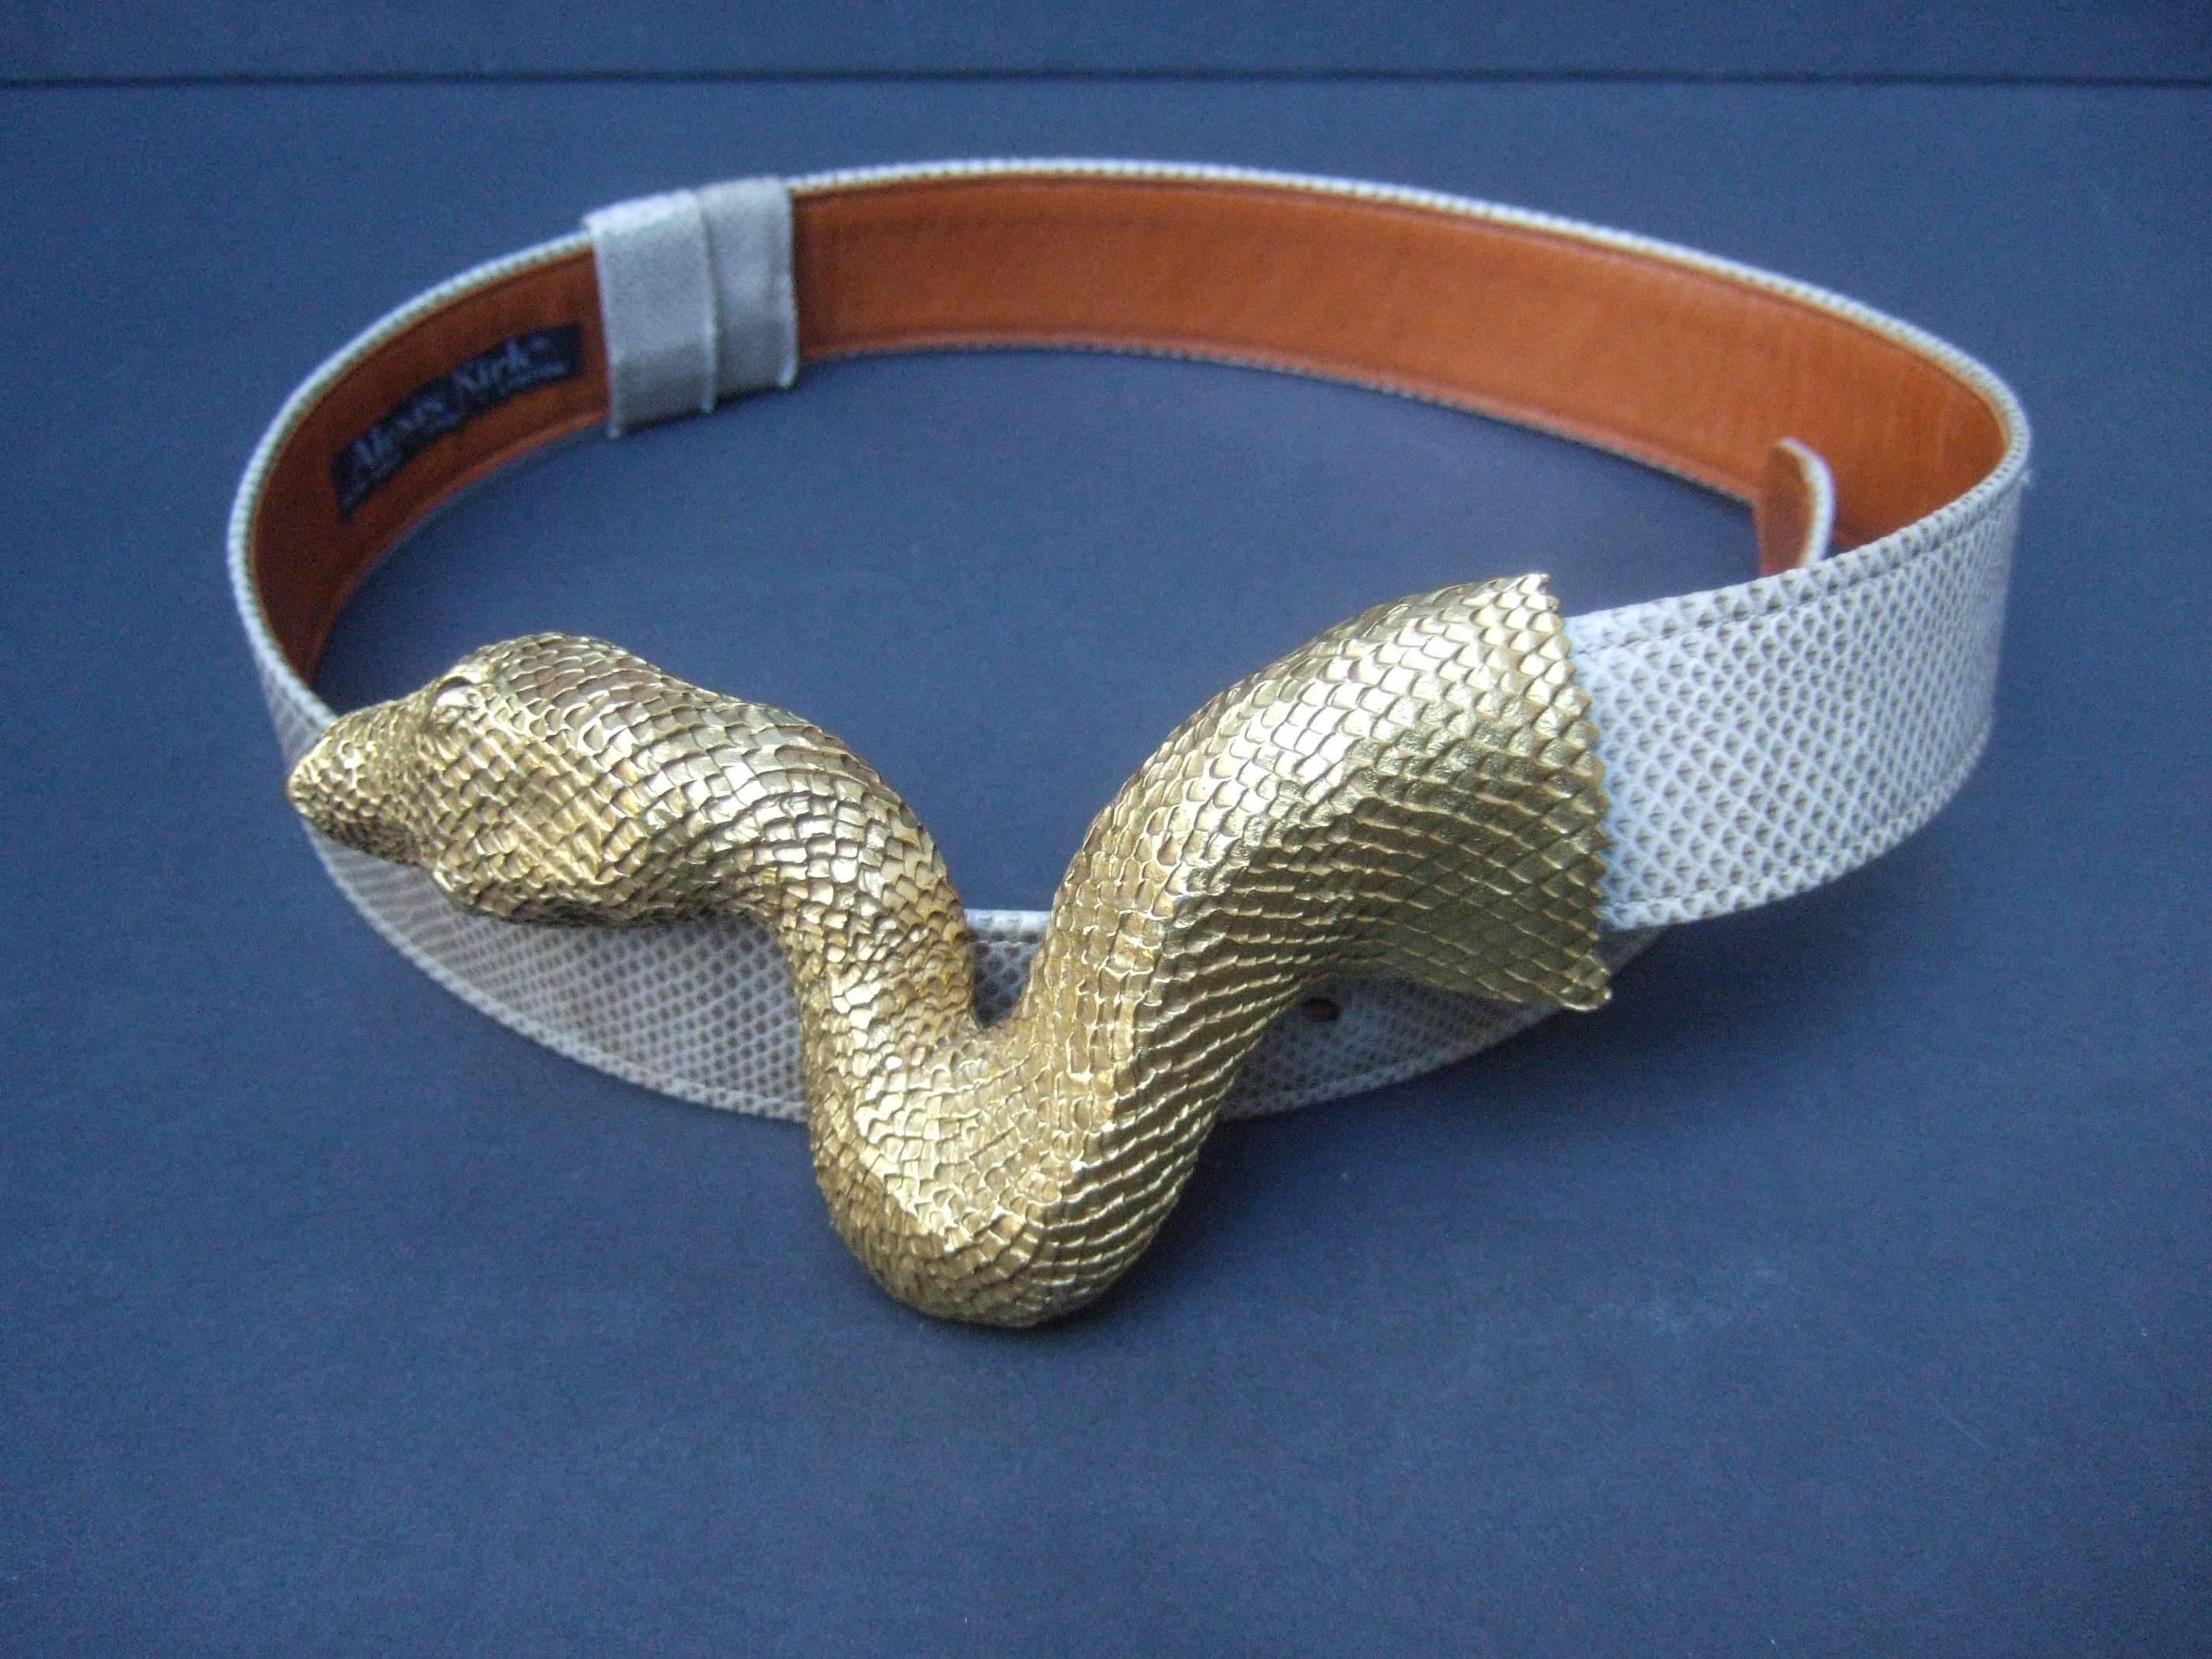 Christopher Ross Exotic serpent belt buckle 
The avant-garde gilt metal buckle is designed
with a massive ornate gilt metal serpent head

The serpent has a gilt metal finish with 
etched textured detail that emulates scales   
The snake is